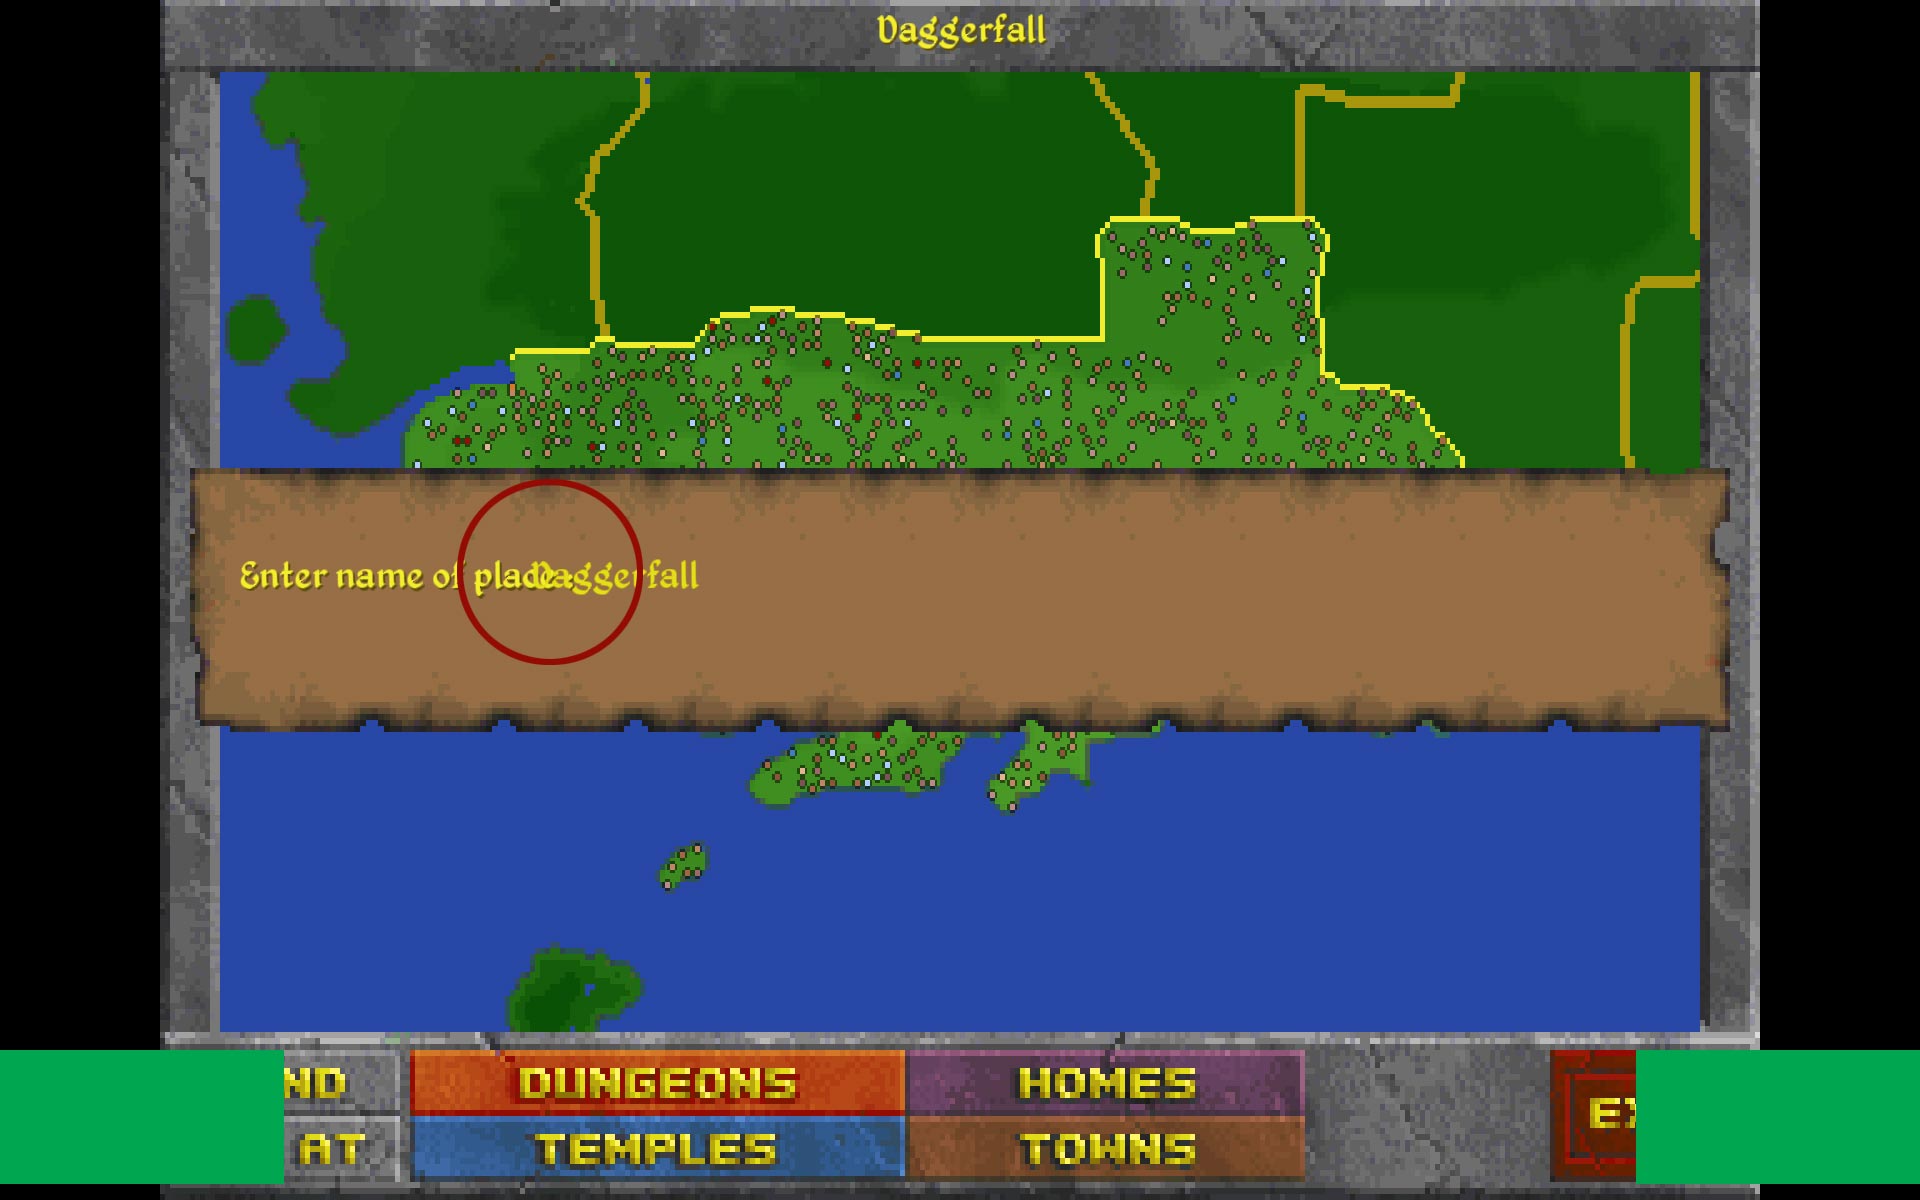 The green rectangles I've drawn are, roughly, the areas the game listens to the mouse clicks. So if I were to click on the &quot;E&quot; of the &quot;Exit&quot; button it wouldn't register.<br /><br />The circle shows the misalignment of the search text field.